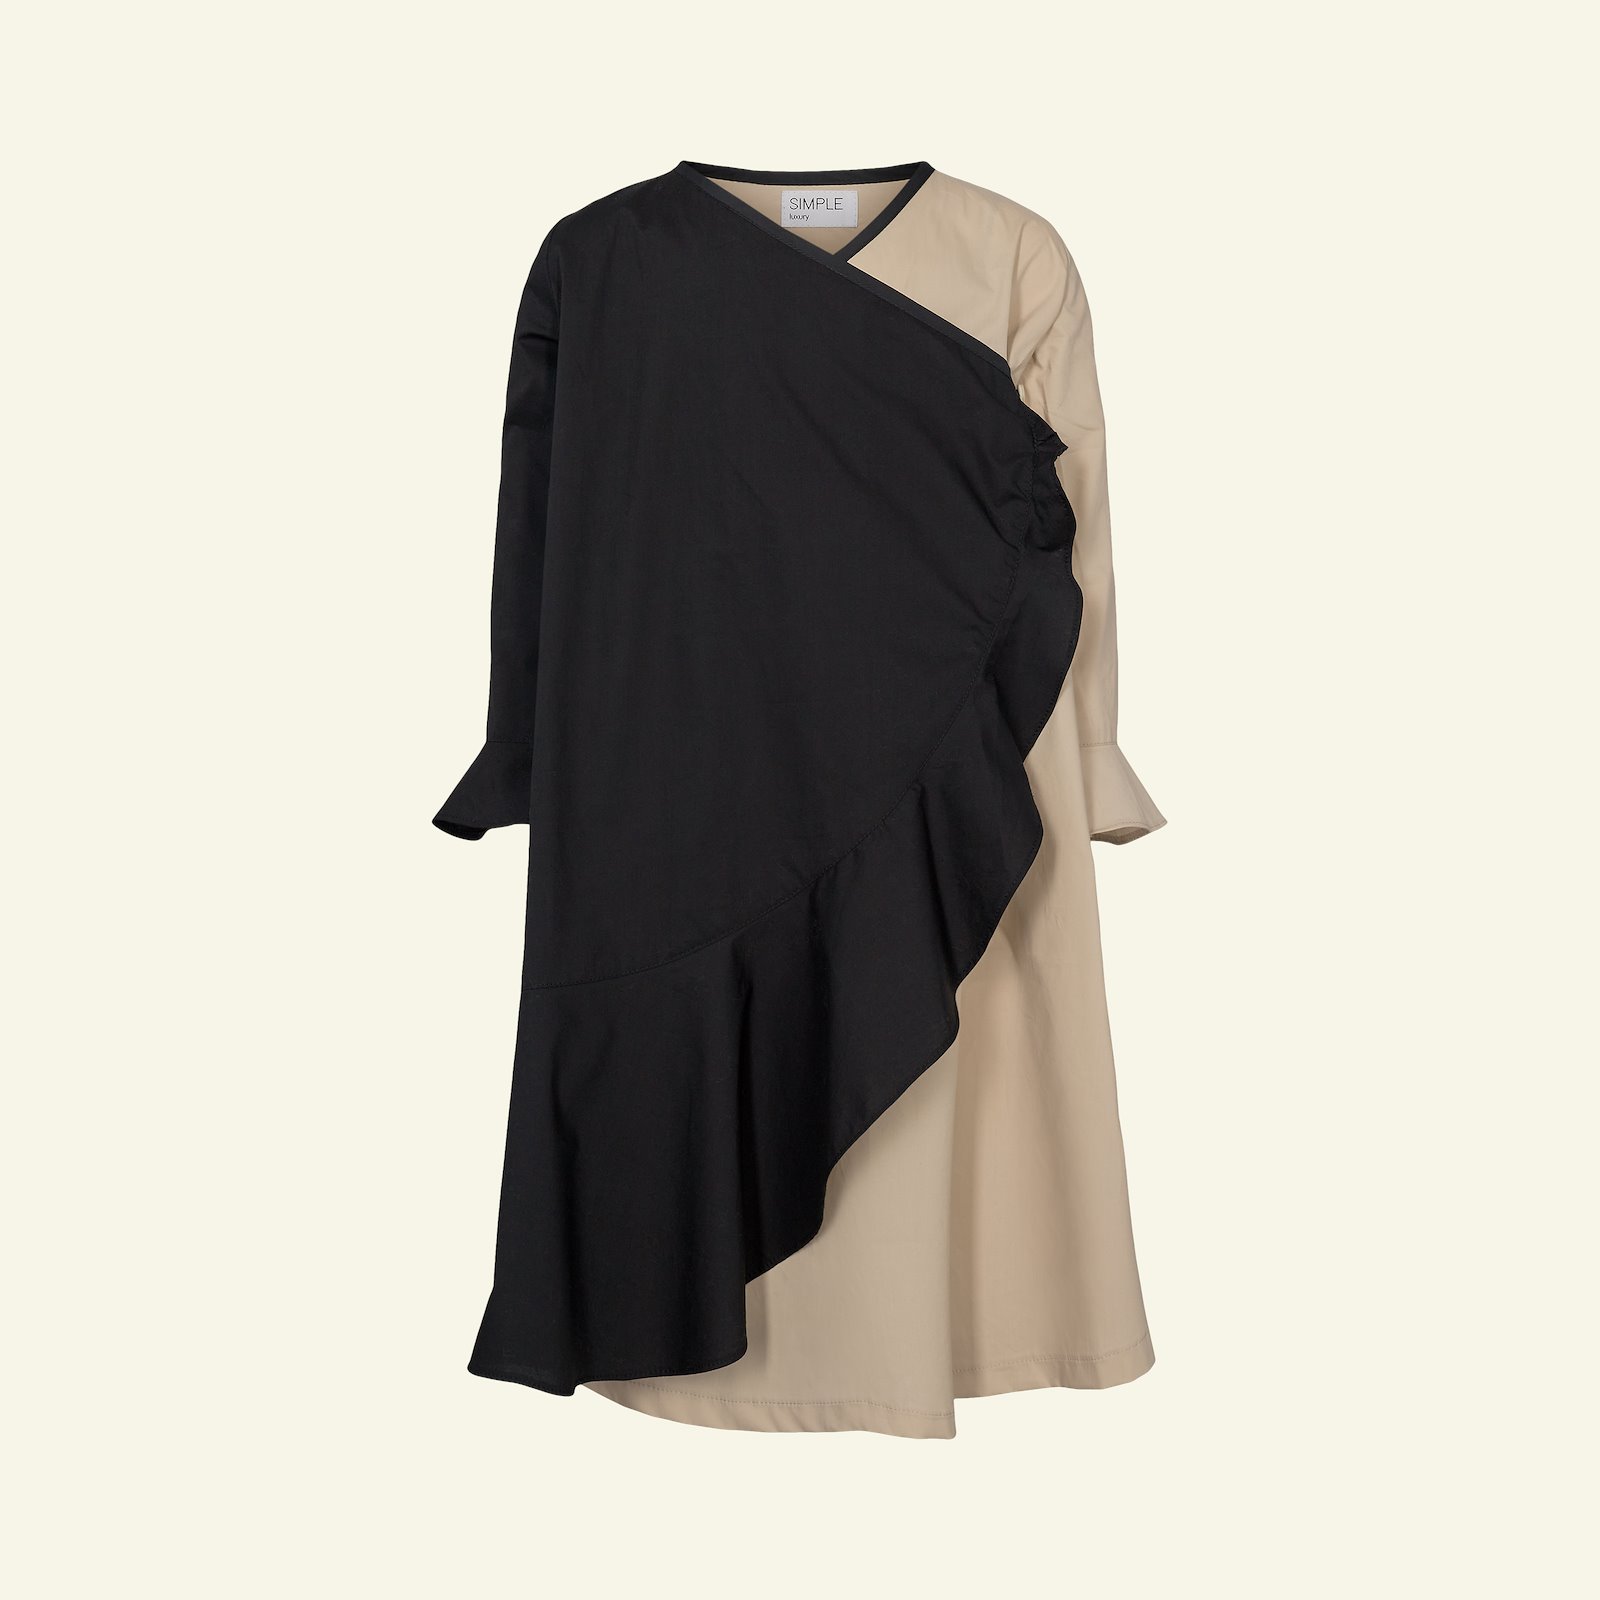 Dress und blouse with flounce, 116/6y p63066_540110_510112_64080_24865_sskit